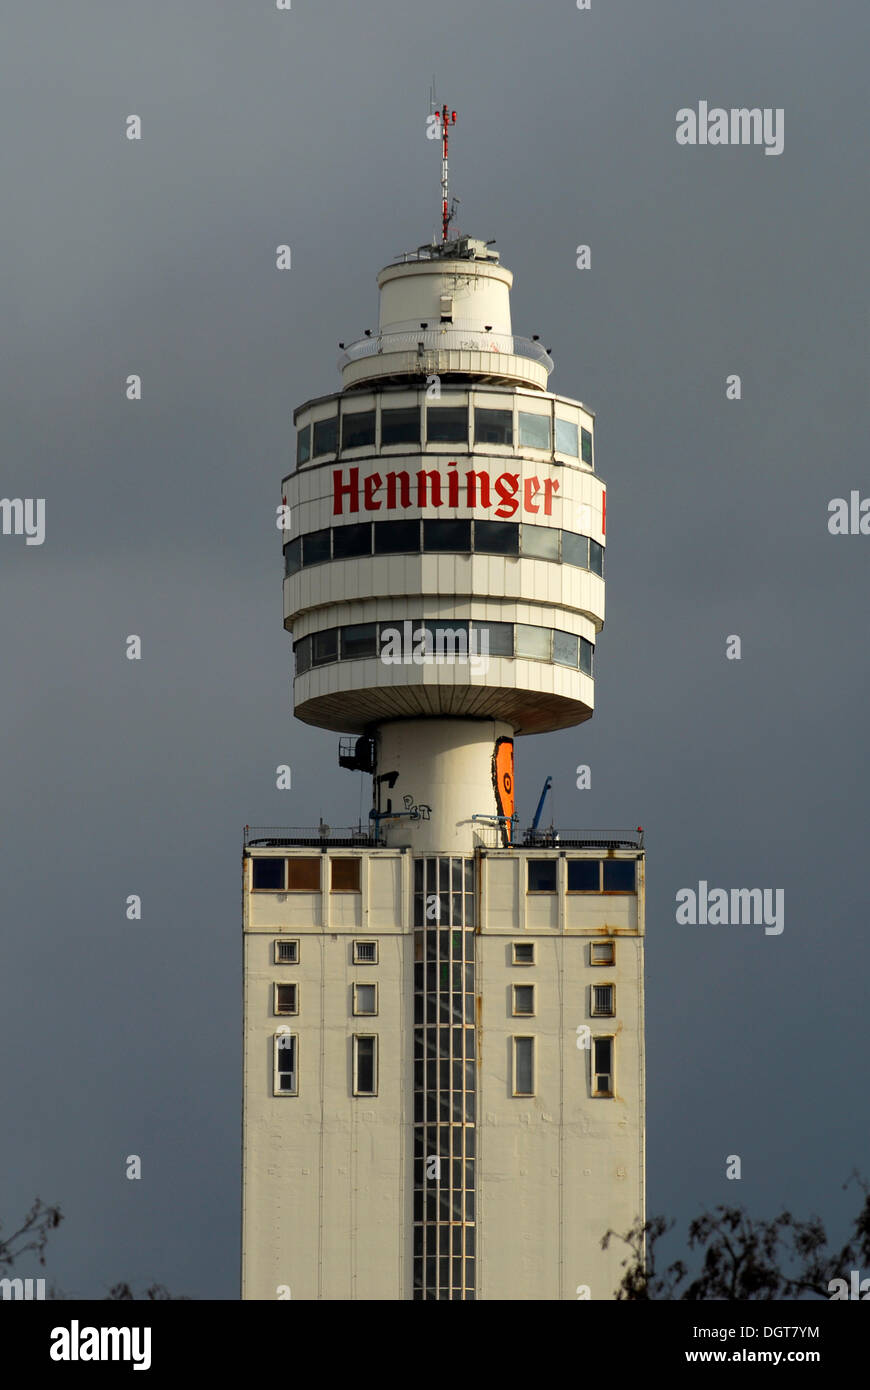 Henninger Turm High Resolution Stock Photography and Images - Alamy